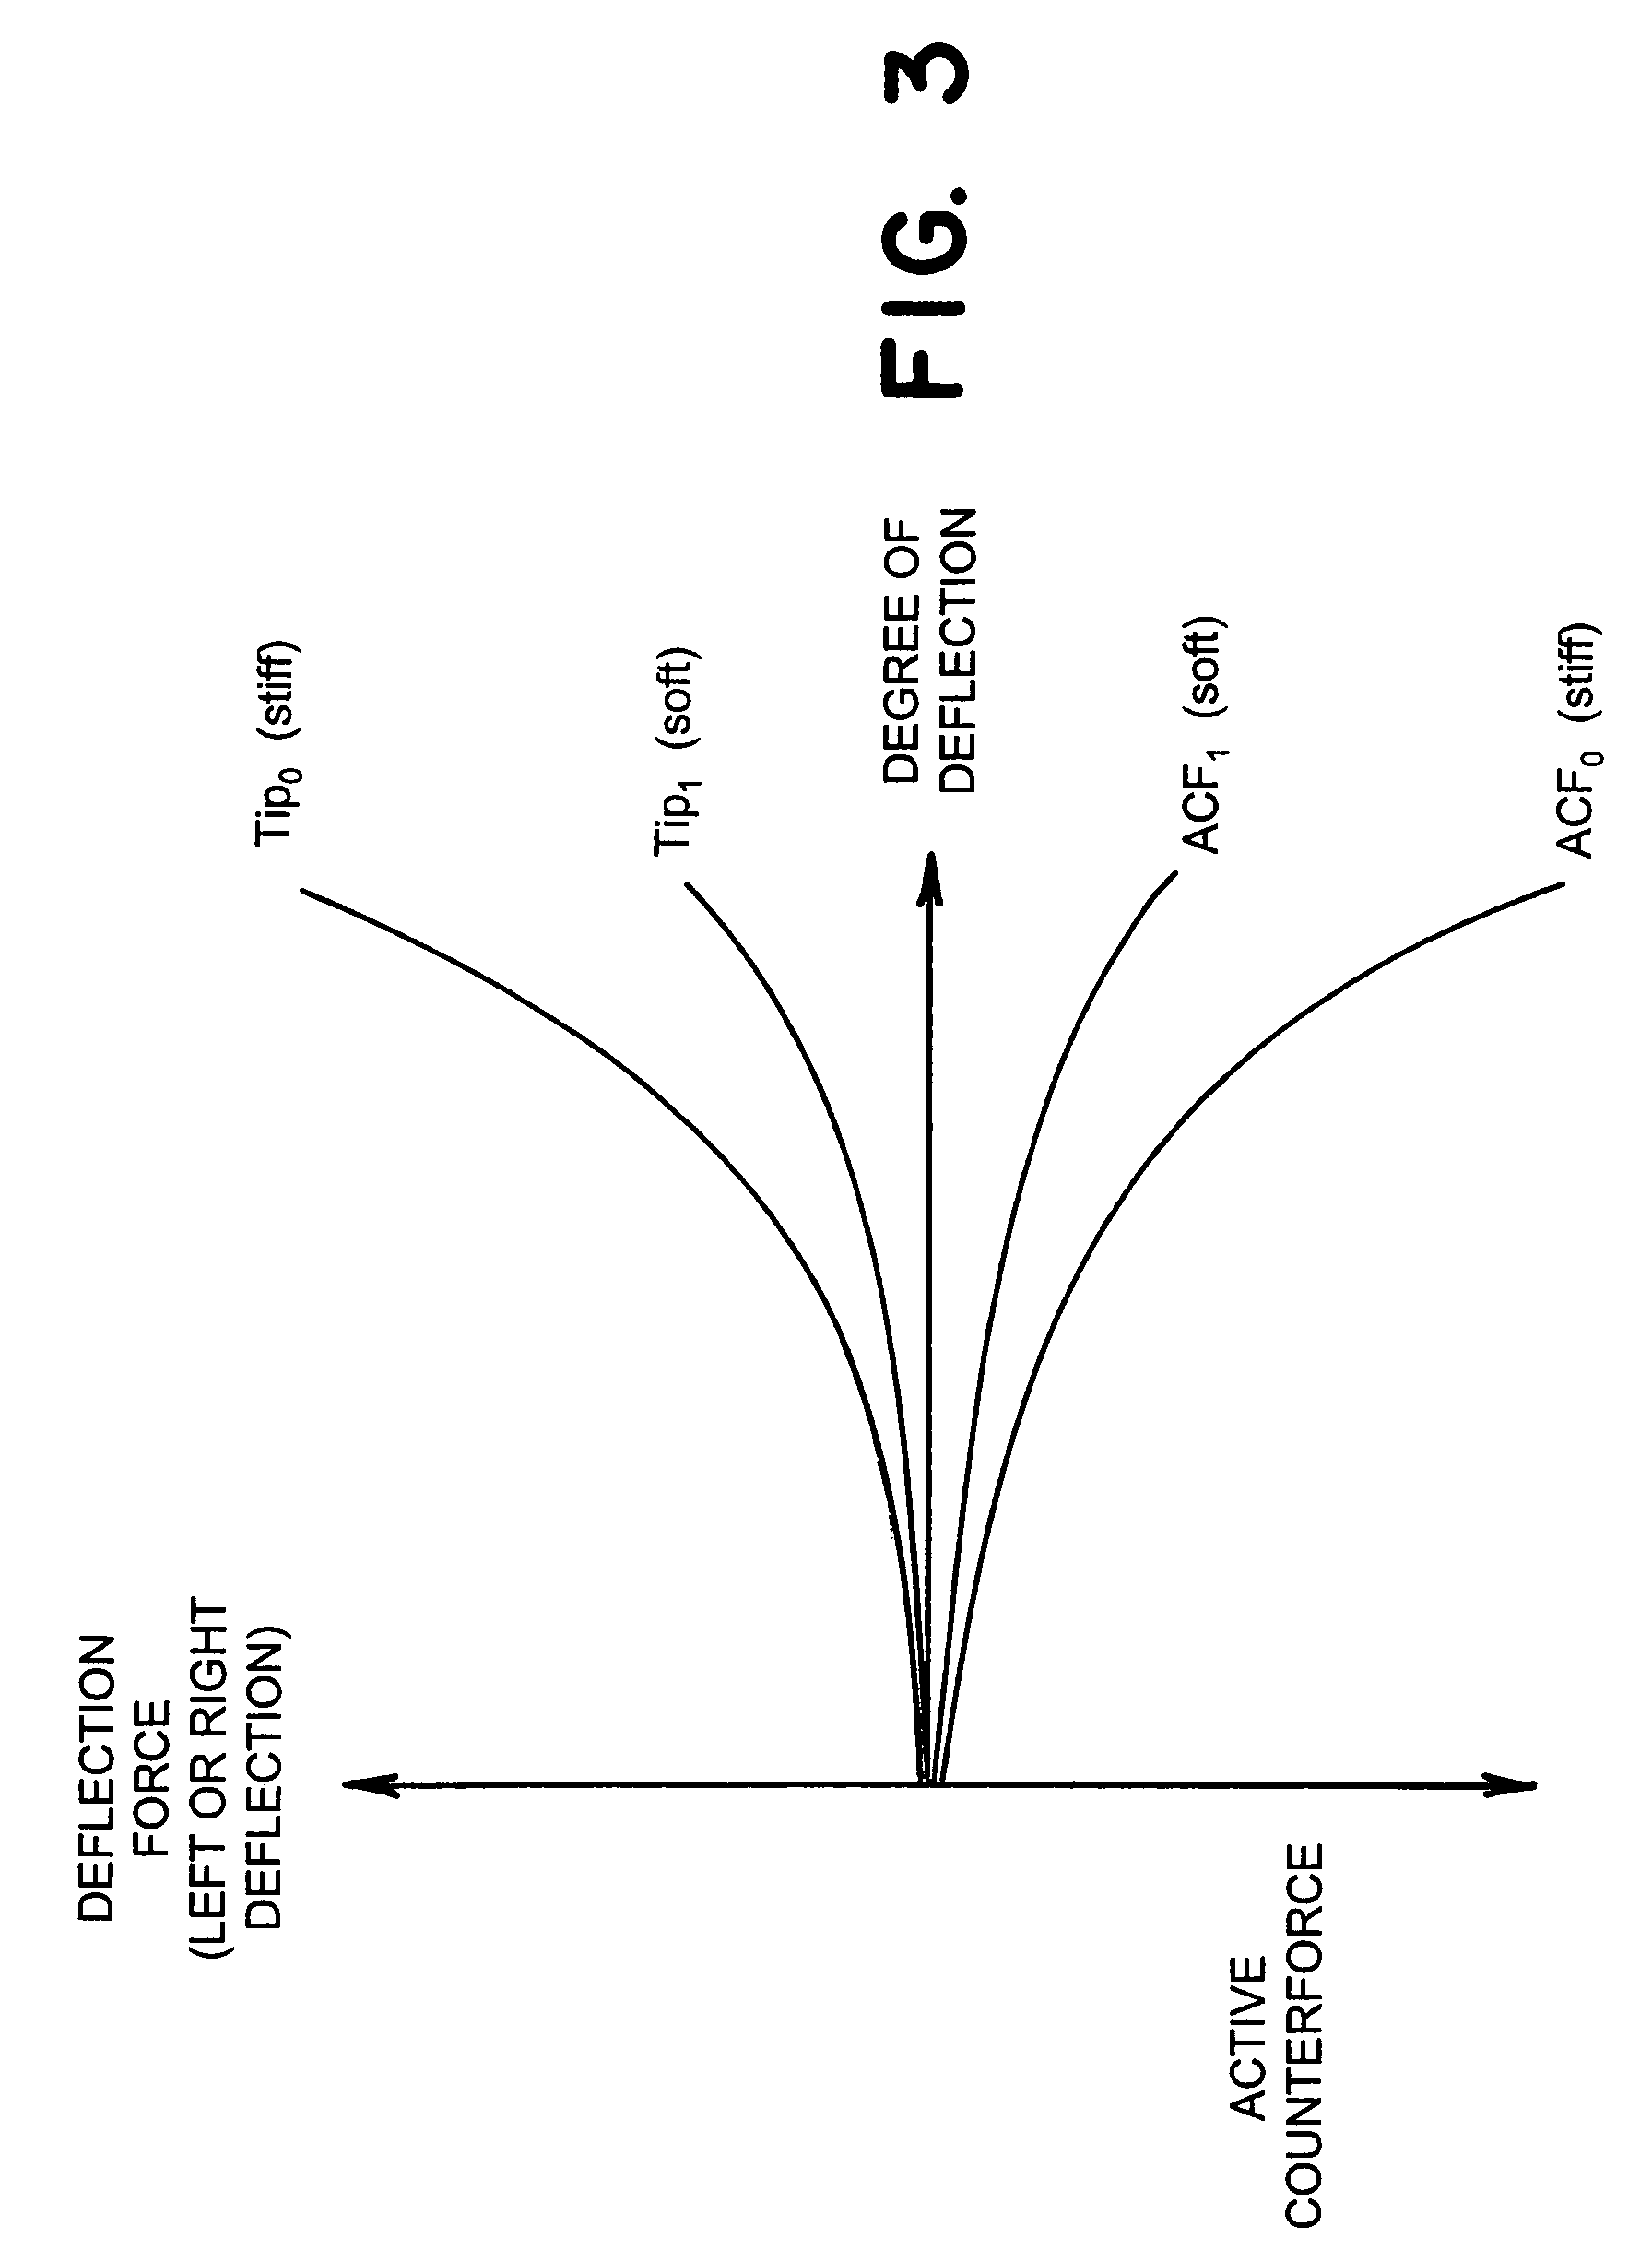 Active counterforce handle for use in bidirectional deflectable tip instruments